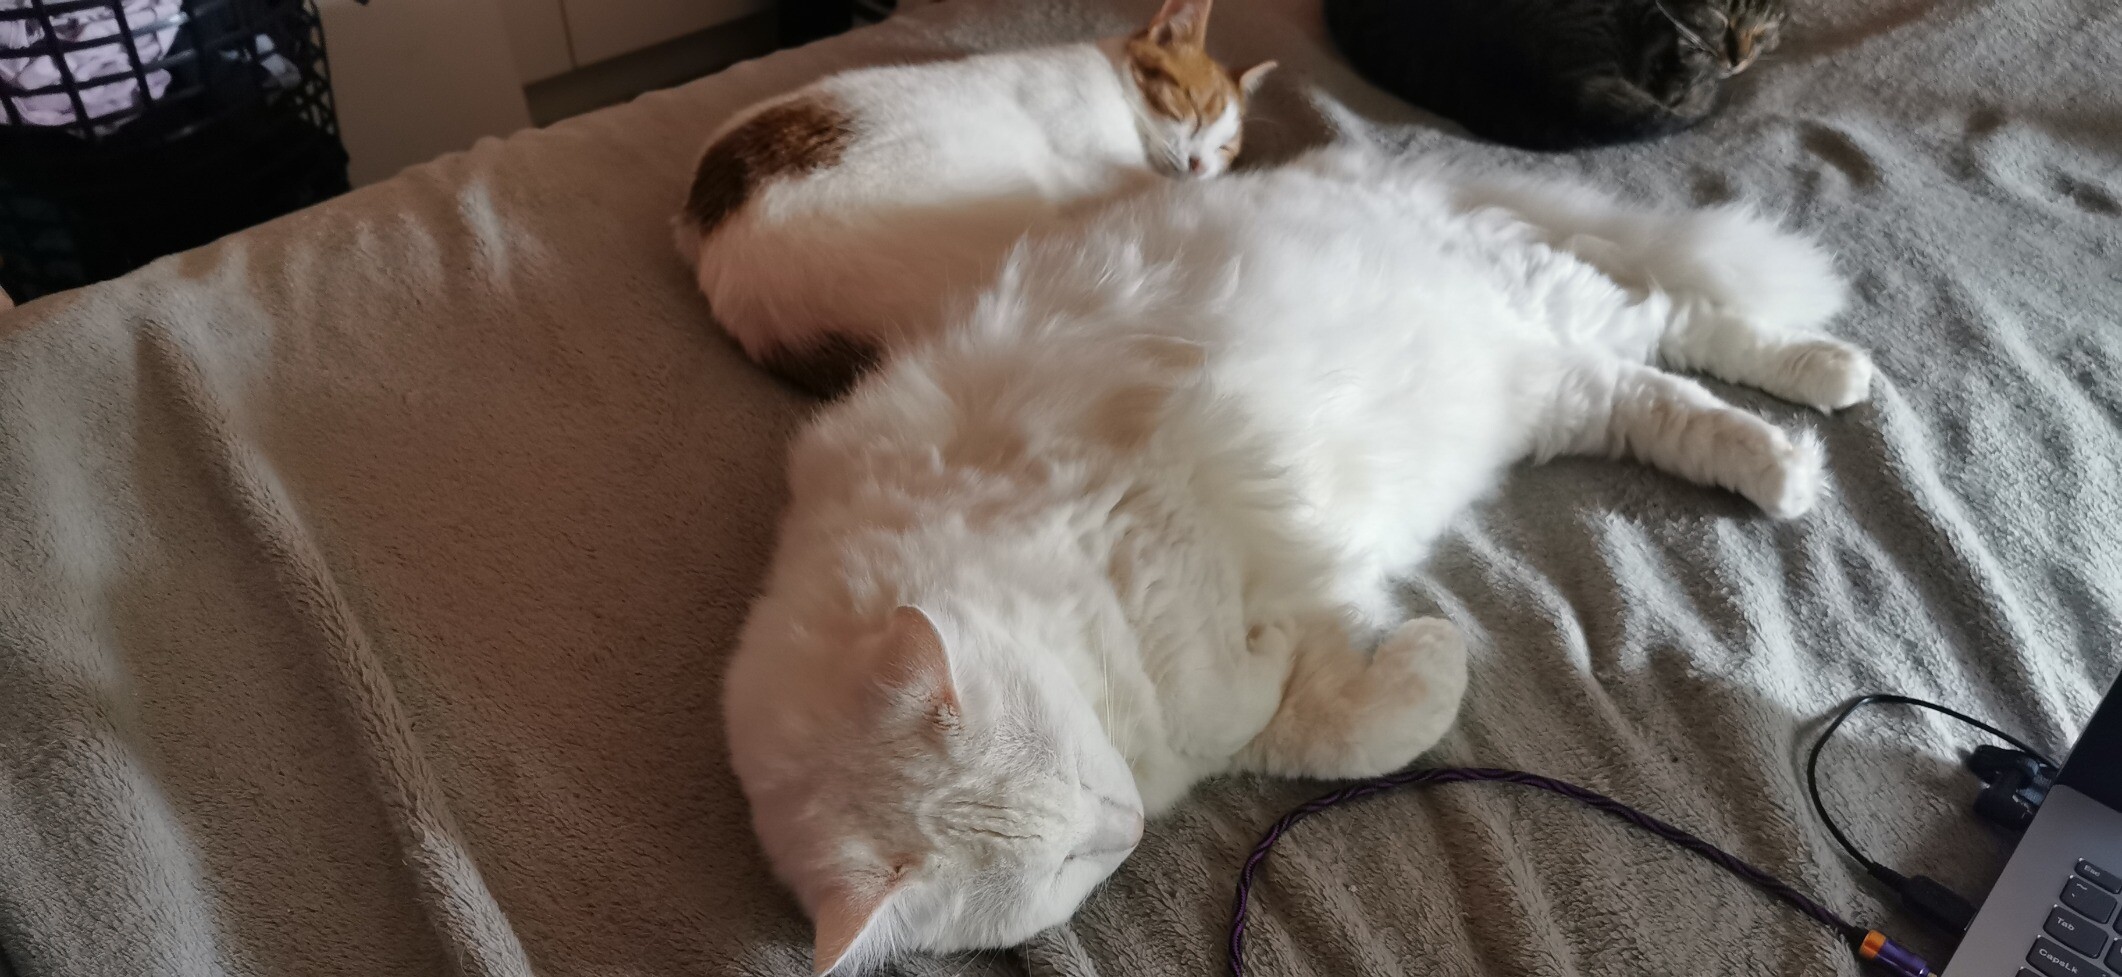 Two cats on a grey blanket. One is a huge white floofmonster and the other is a small white and ginger kitty. 